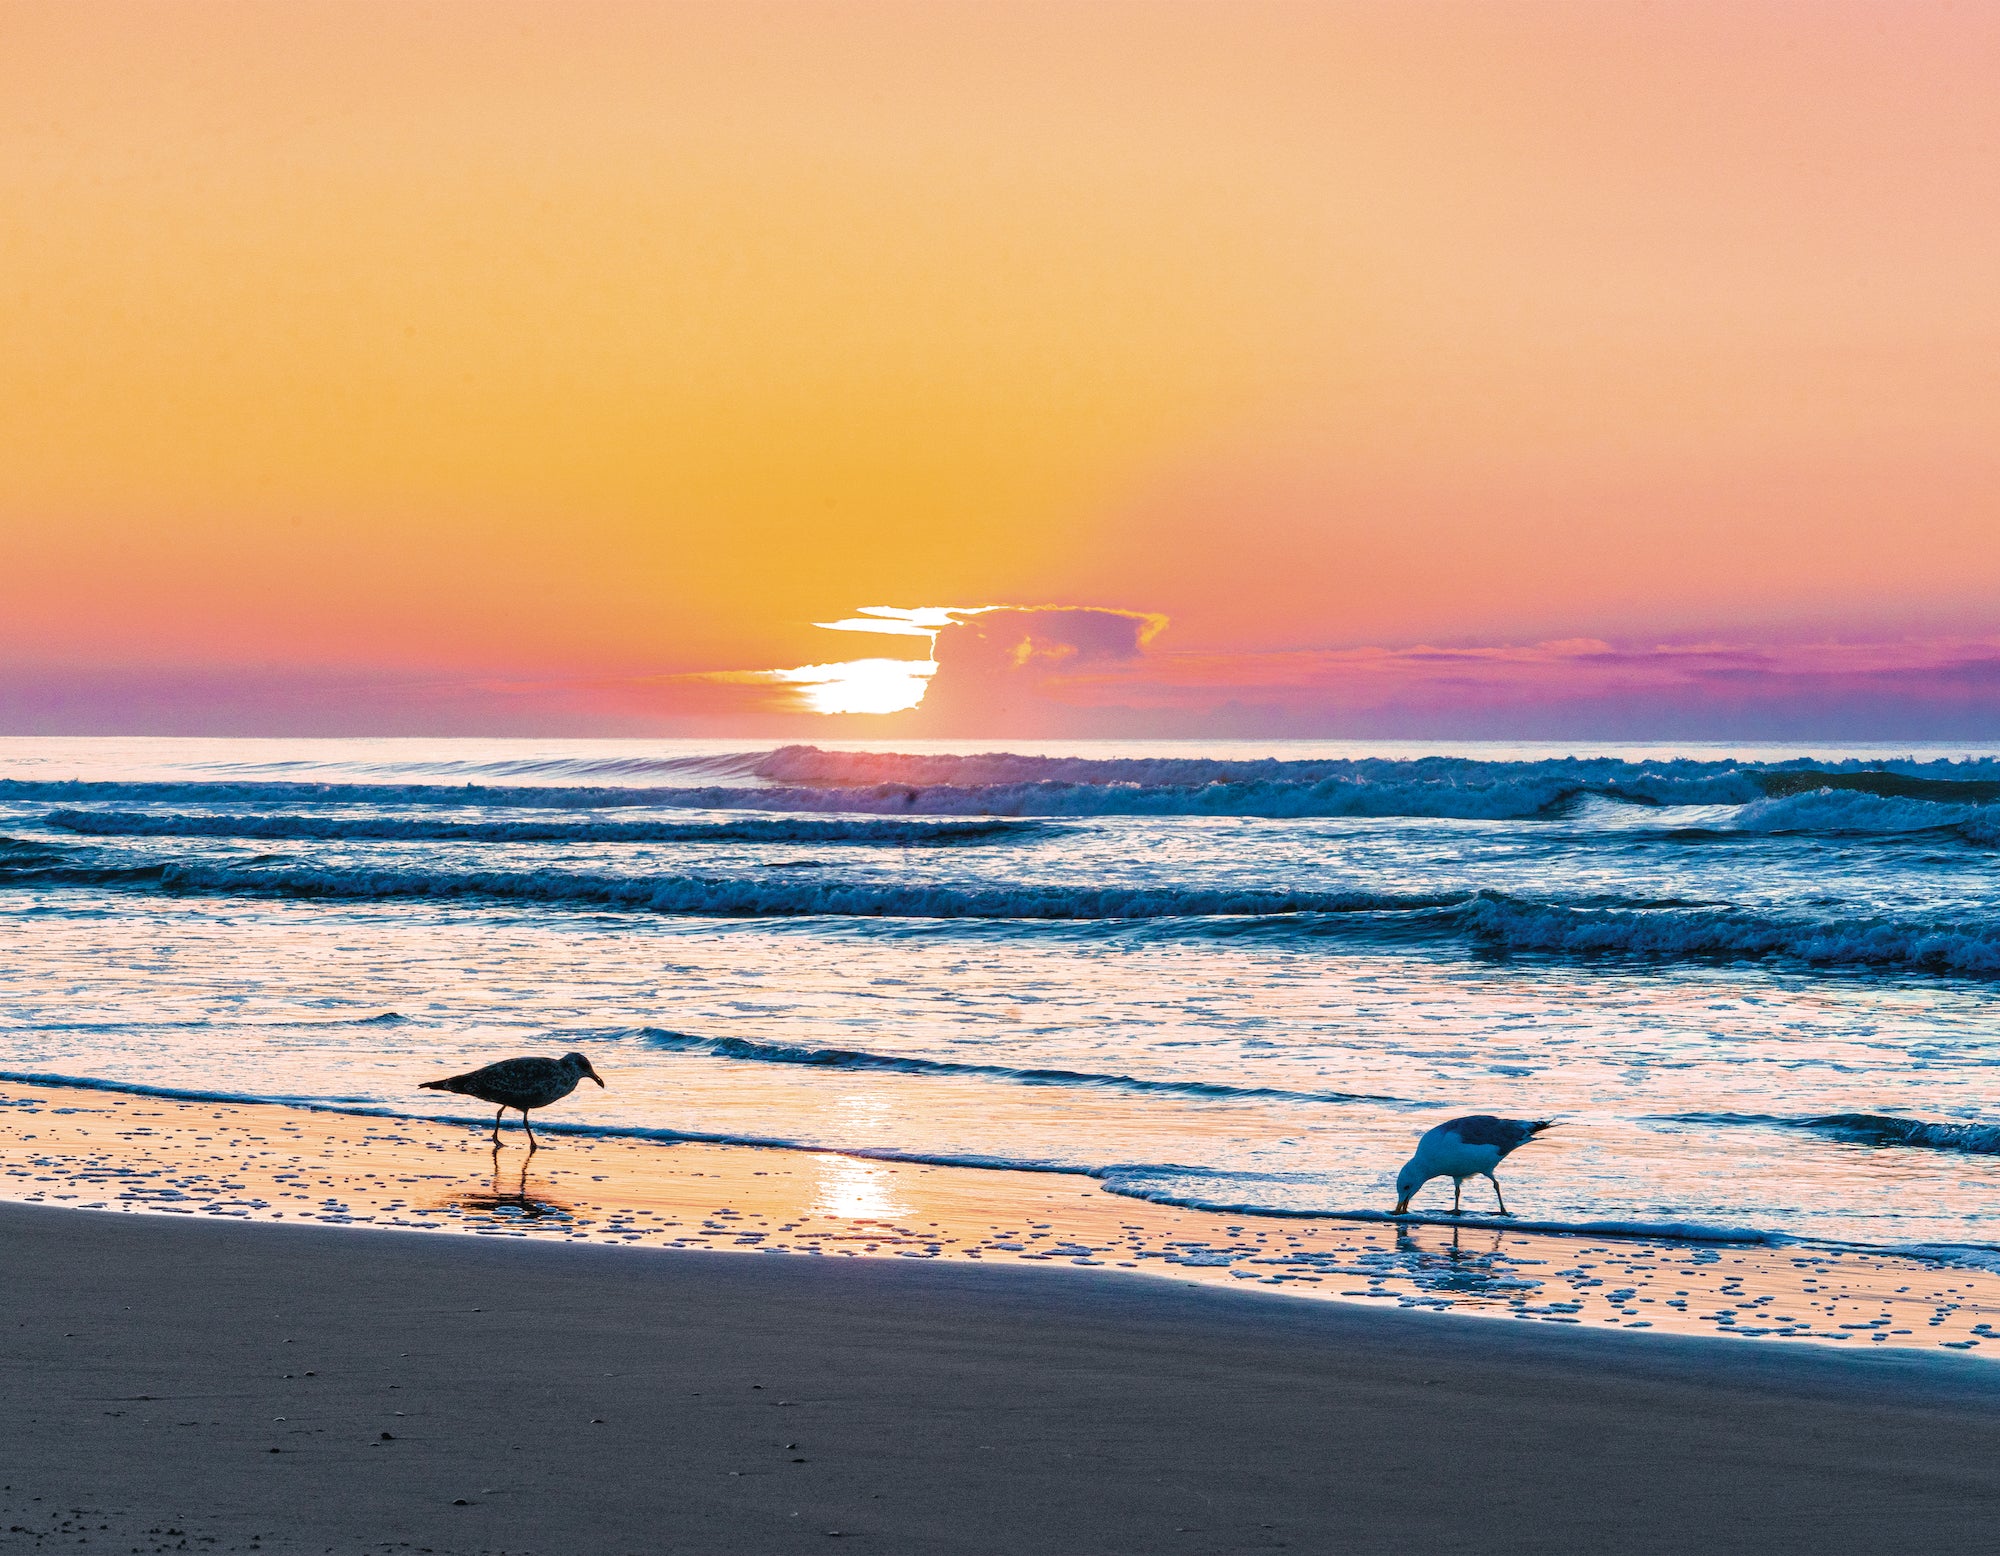 Seagulls in the Ocean Sunrise - Matted 11x14